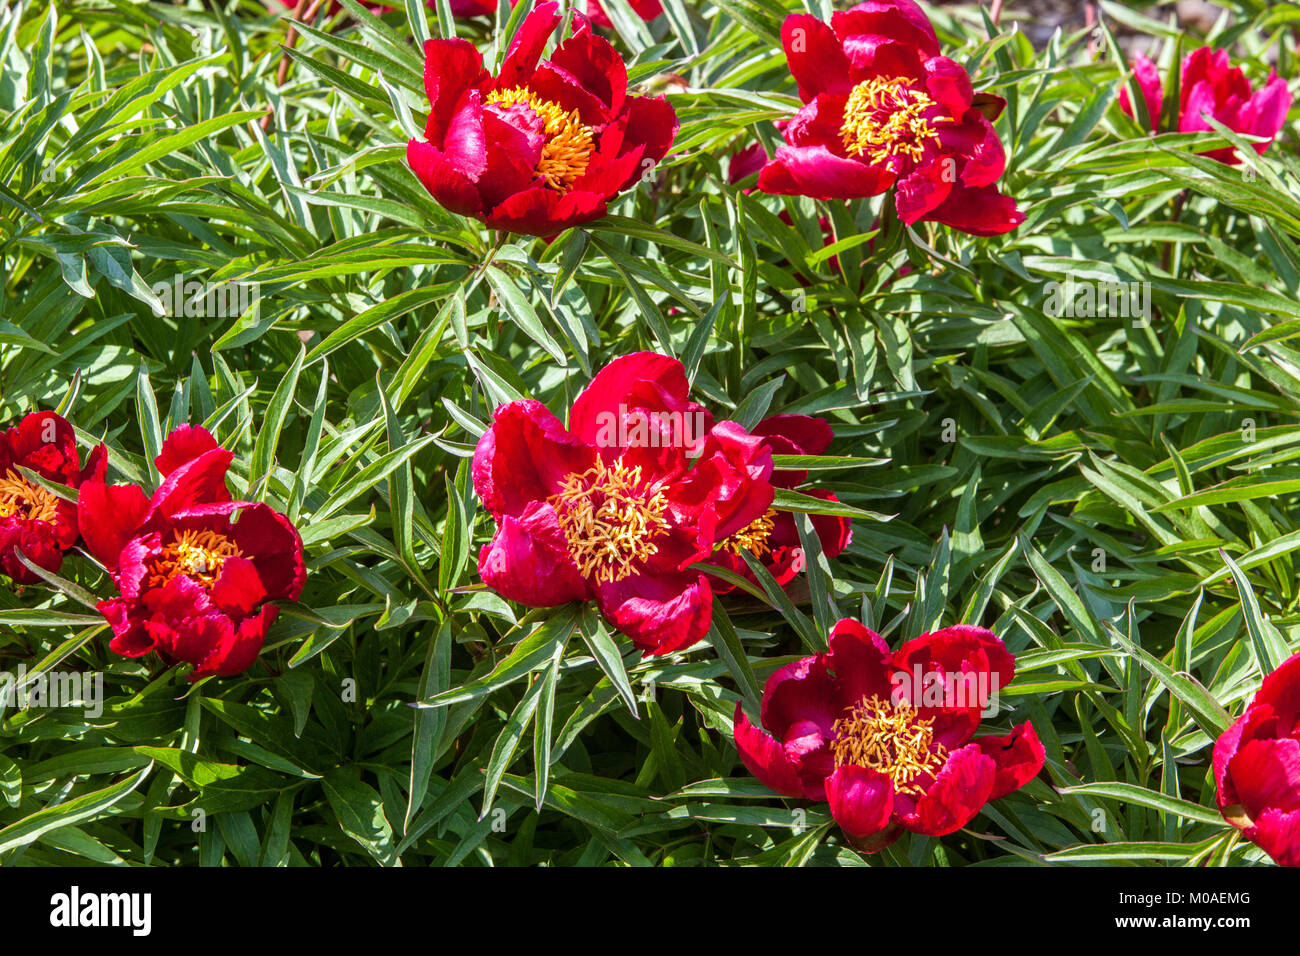 Paeonia "Early Scout", Peony, peonies Stock Photo